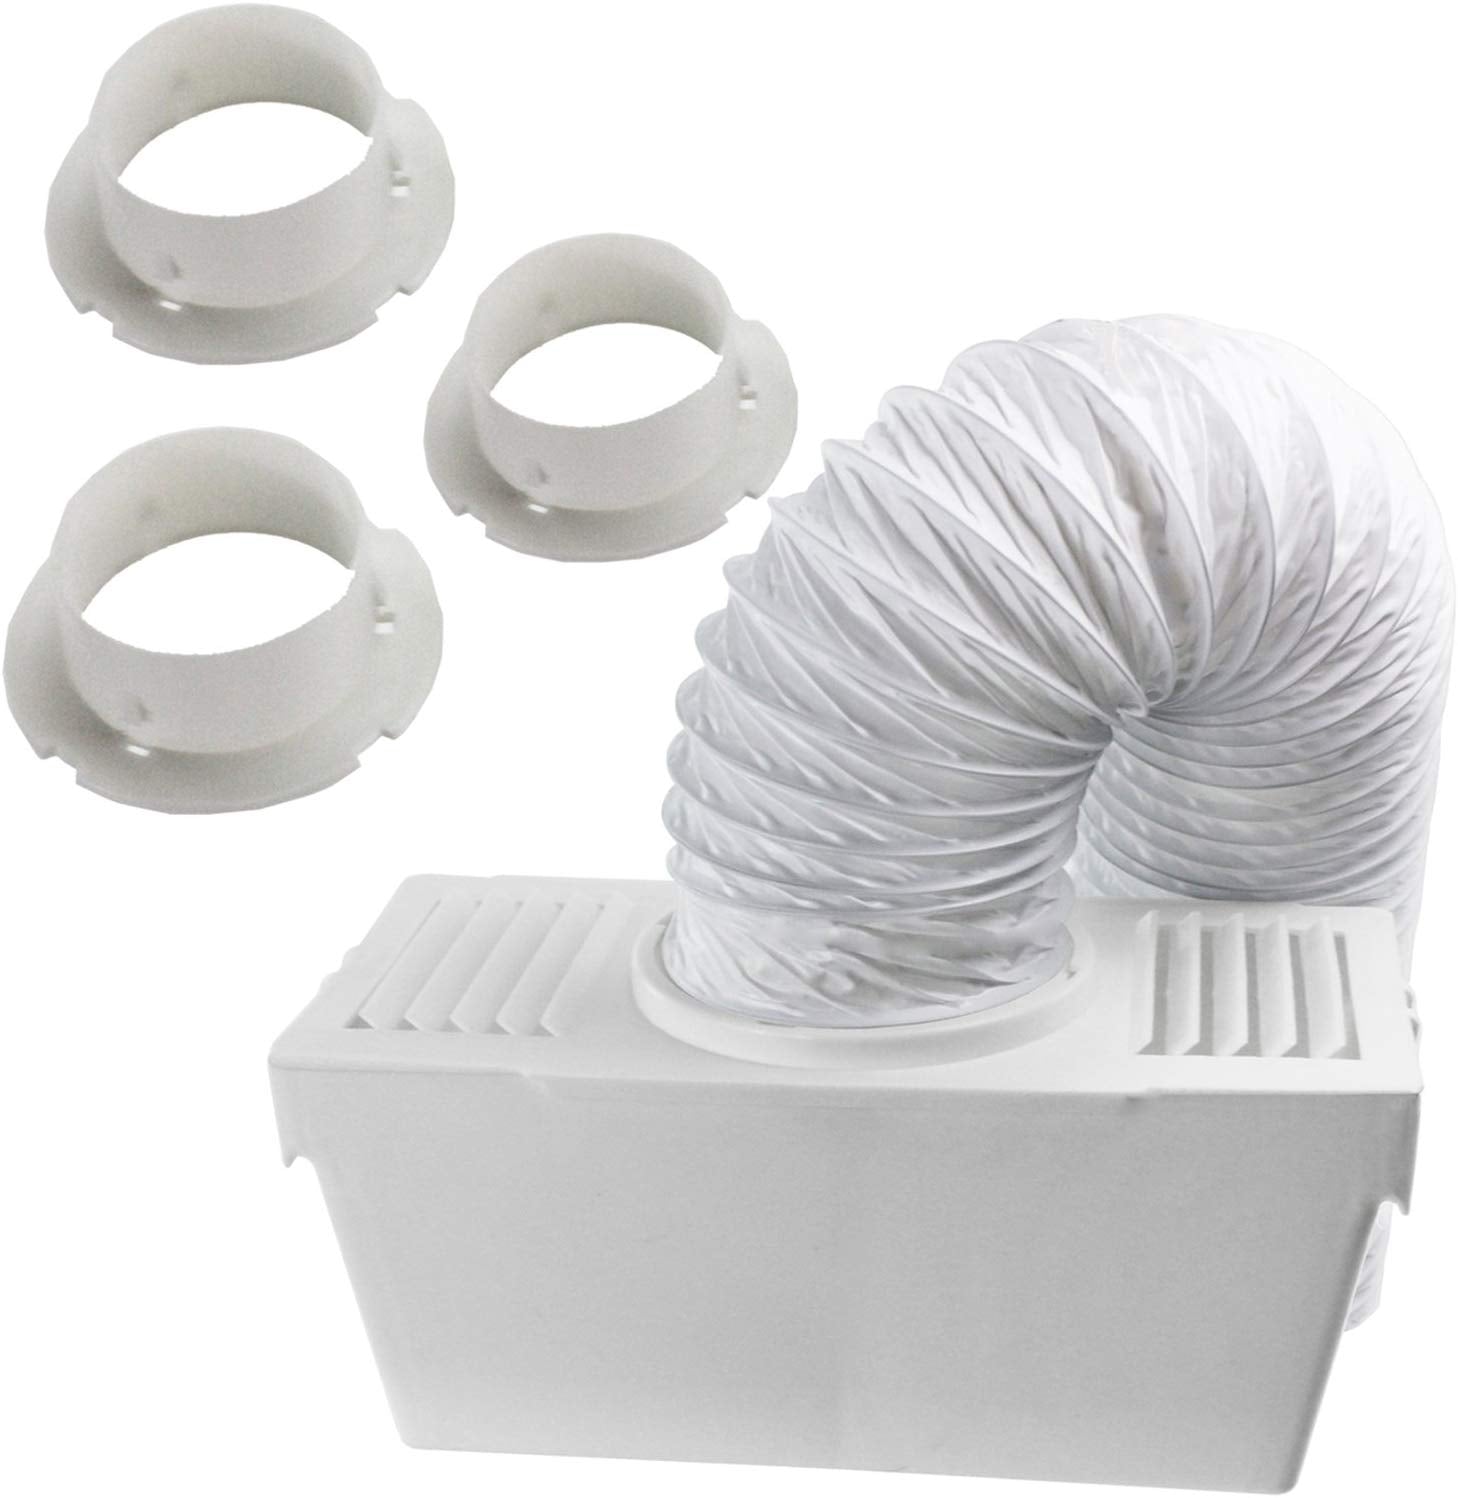 Vent Hose Condenser Kit with 3 x Adapters for Tricity Bendix Tumble Dryer (1.2m)